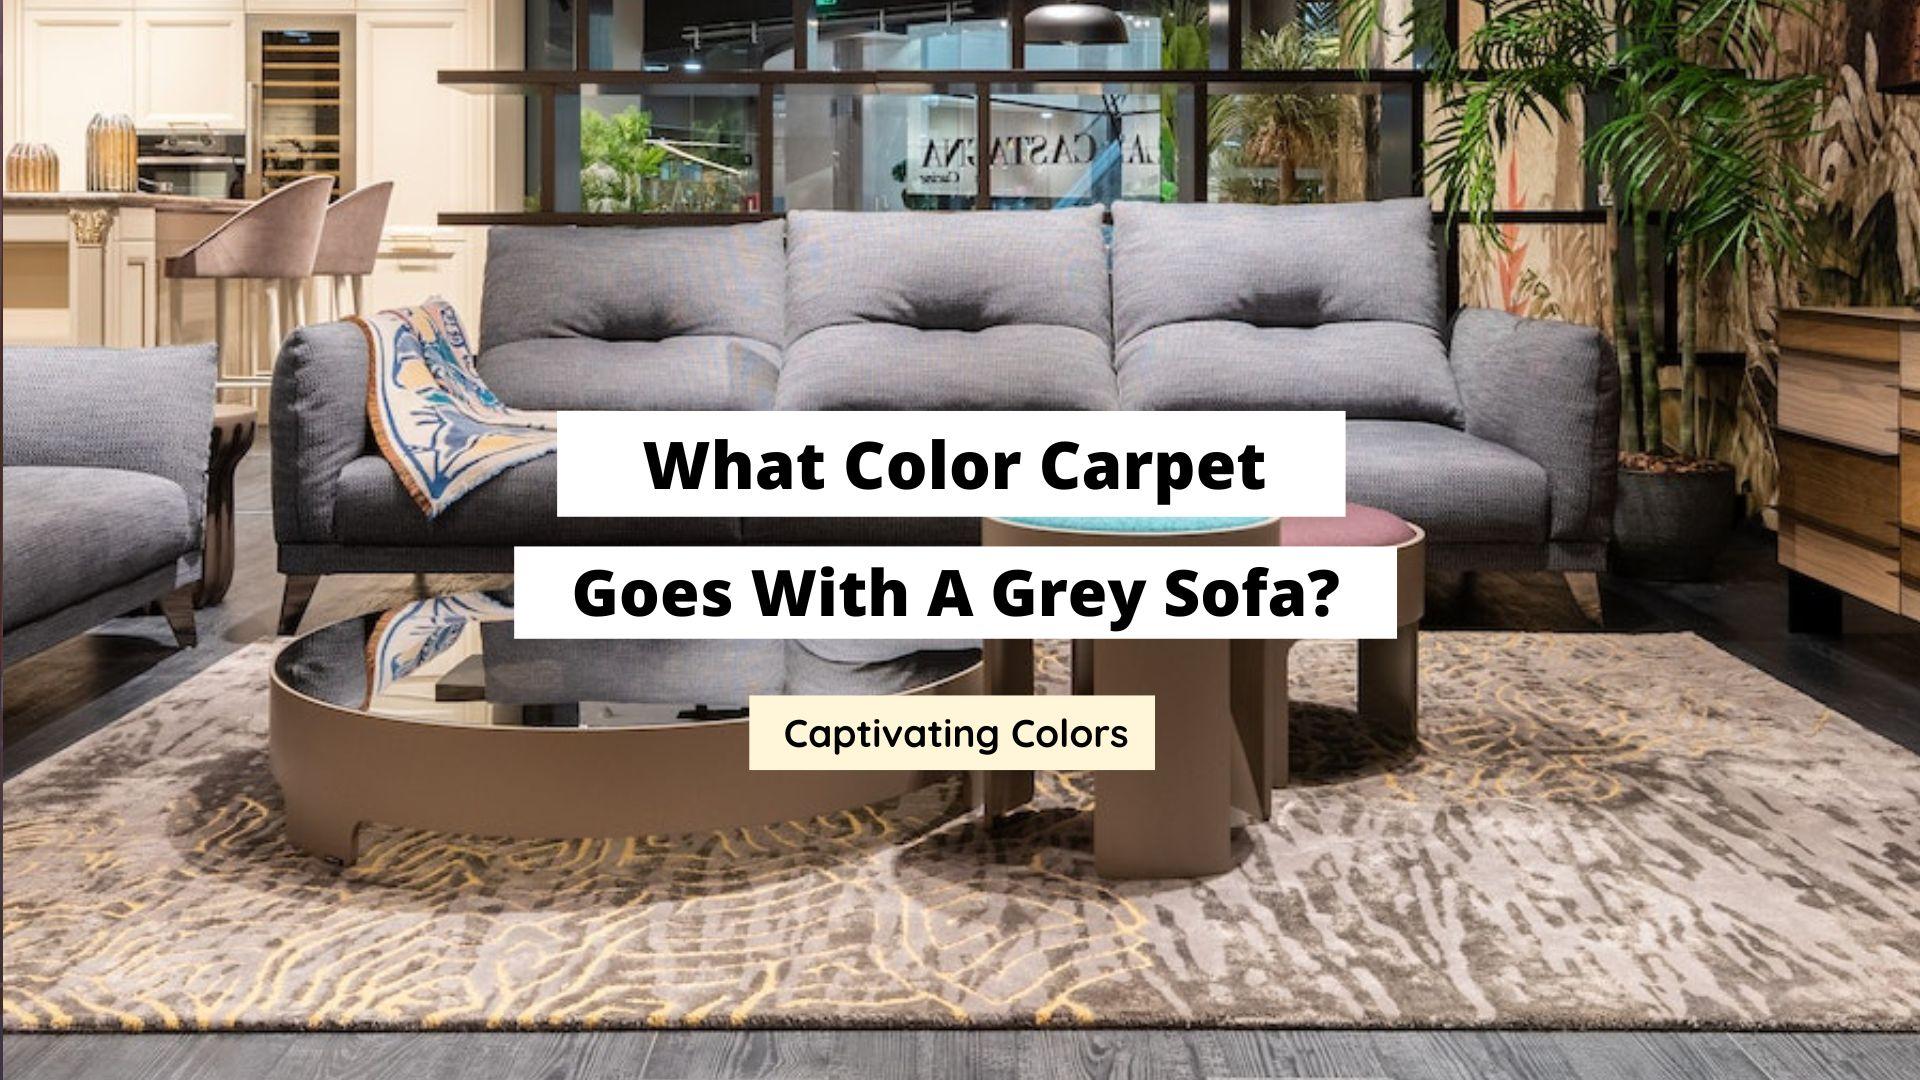 What Color Carpet Goes With A Grey Sofa